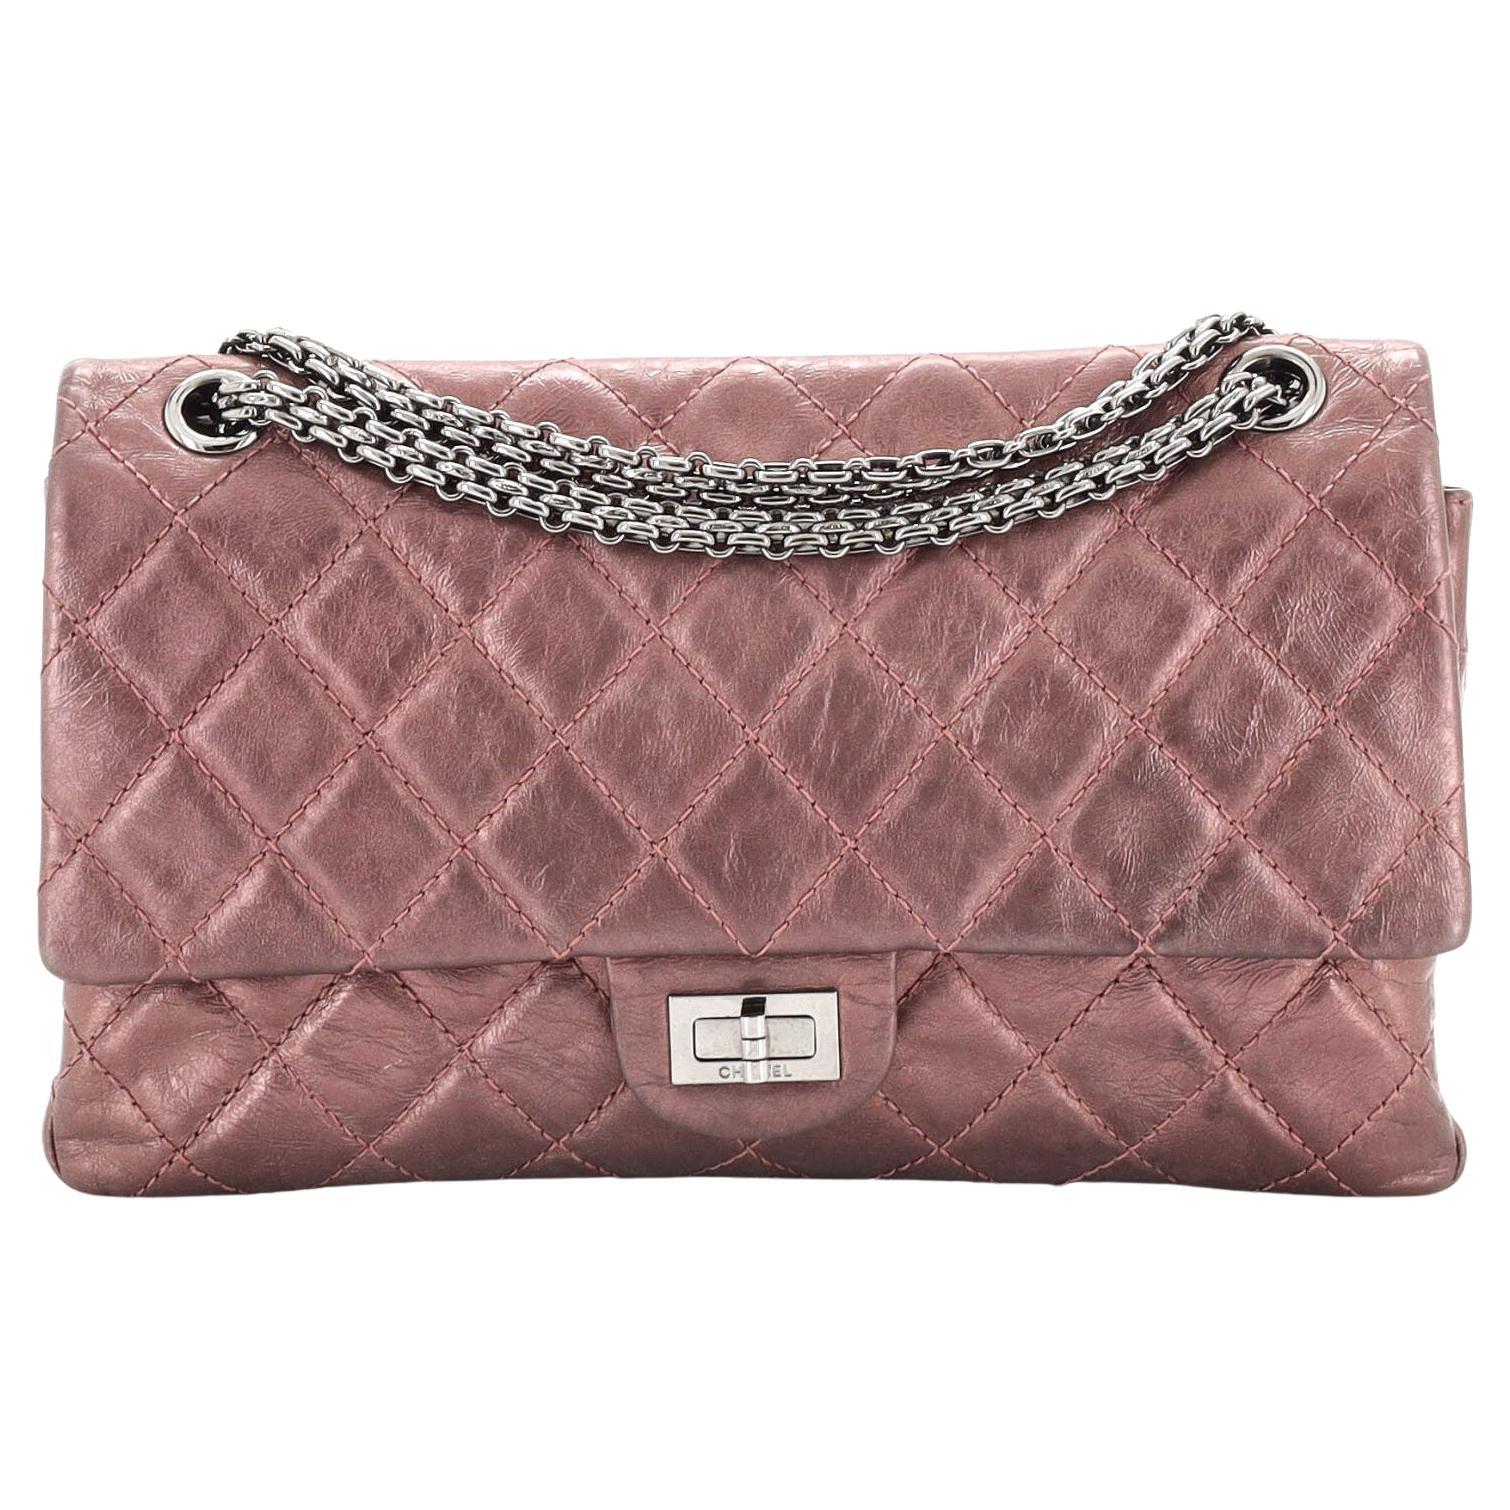 Chanel Reissue 2.55 Flap Bag Quilted Aged Calfskin 226 For Sale